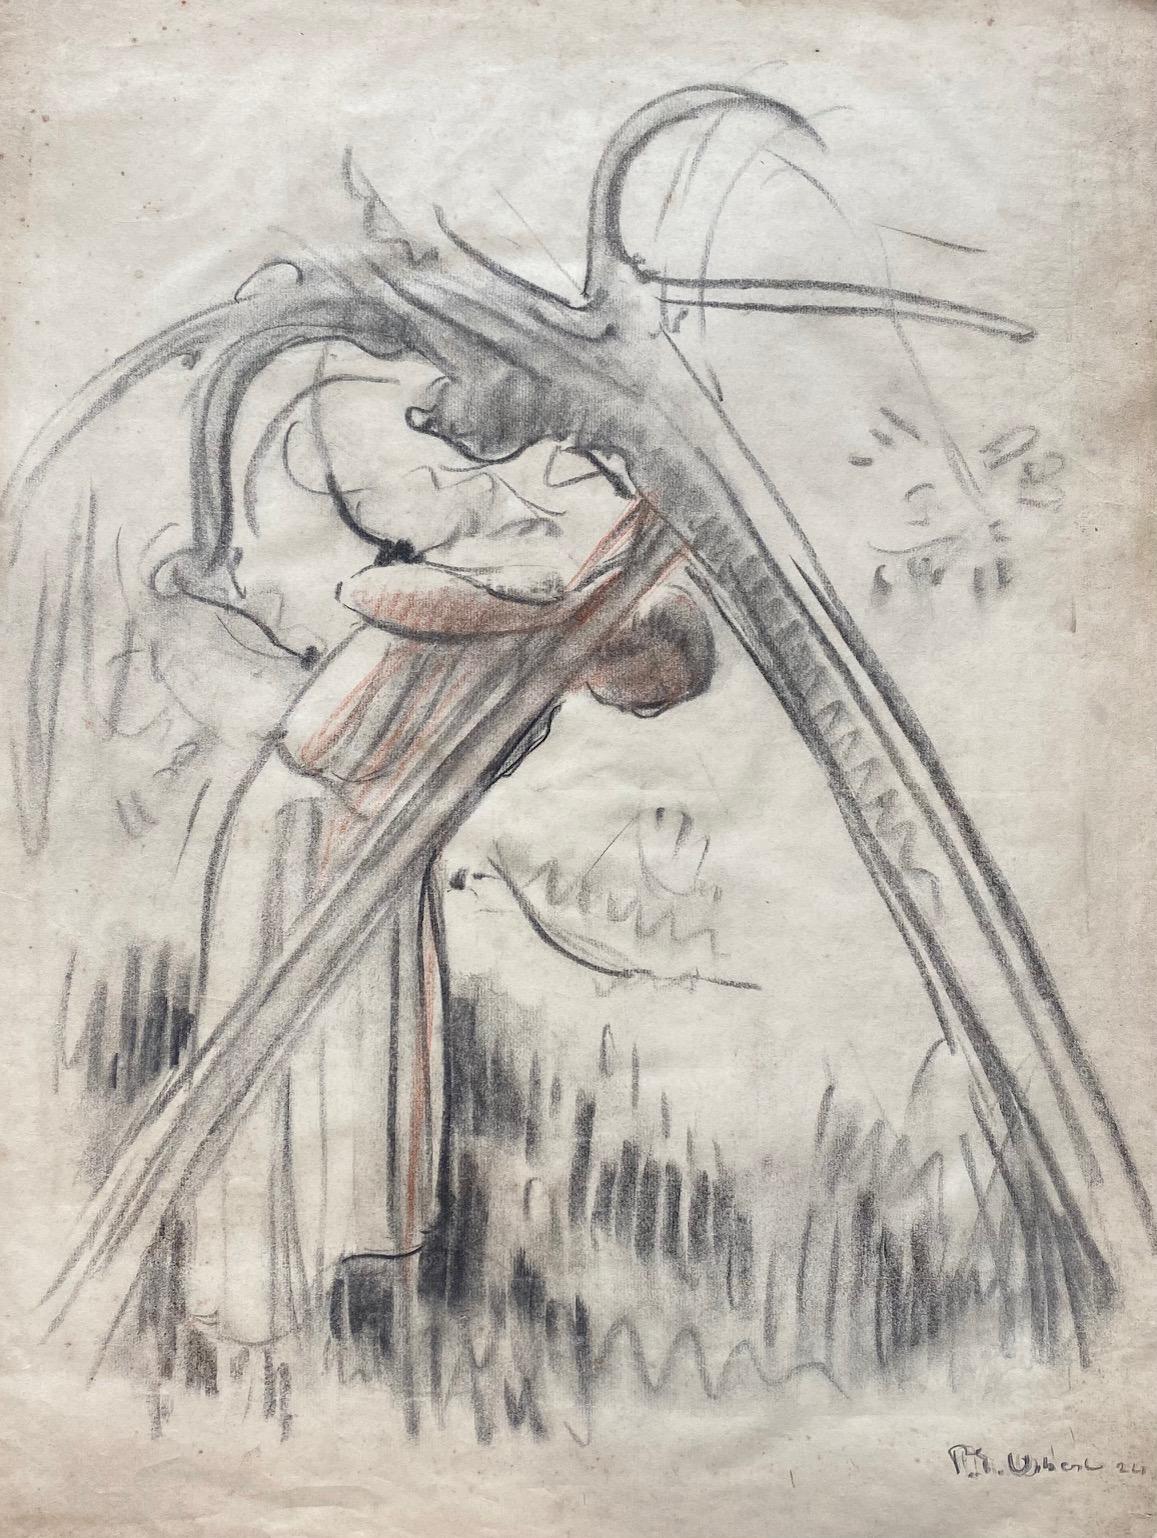 Under the weight of the cross  by Pierre Eugène Vibert - Charcoal 63x48 cm